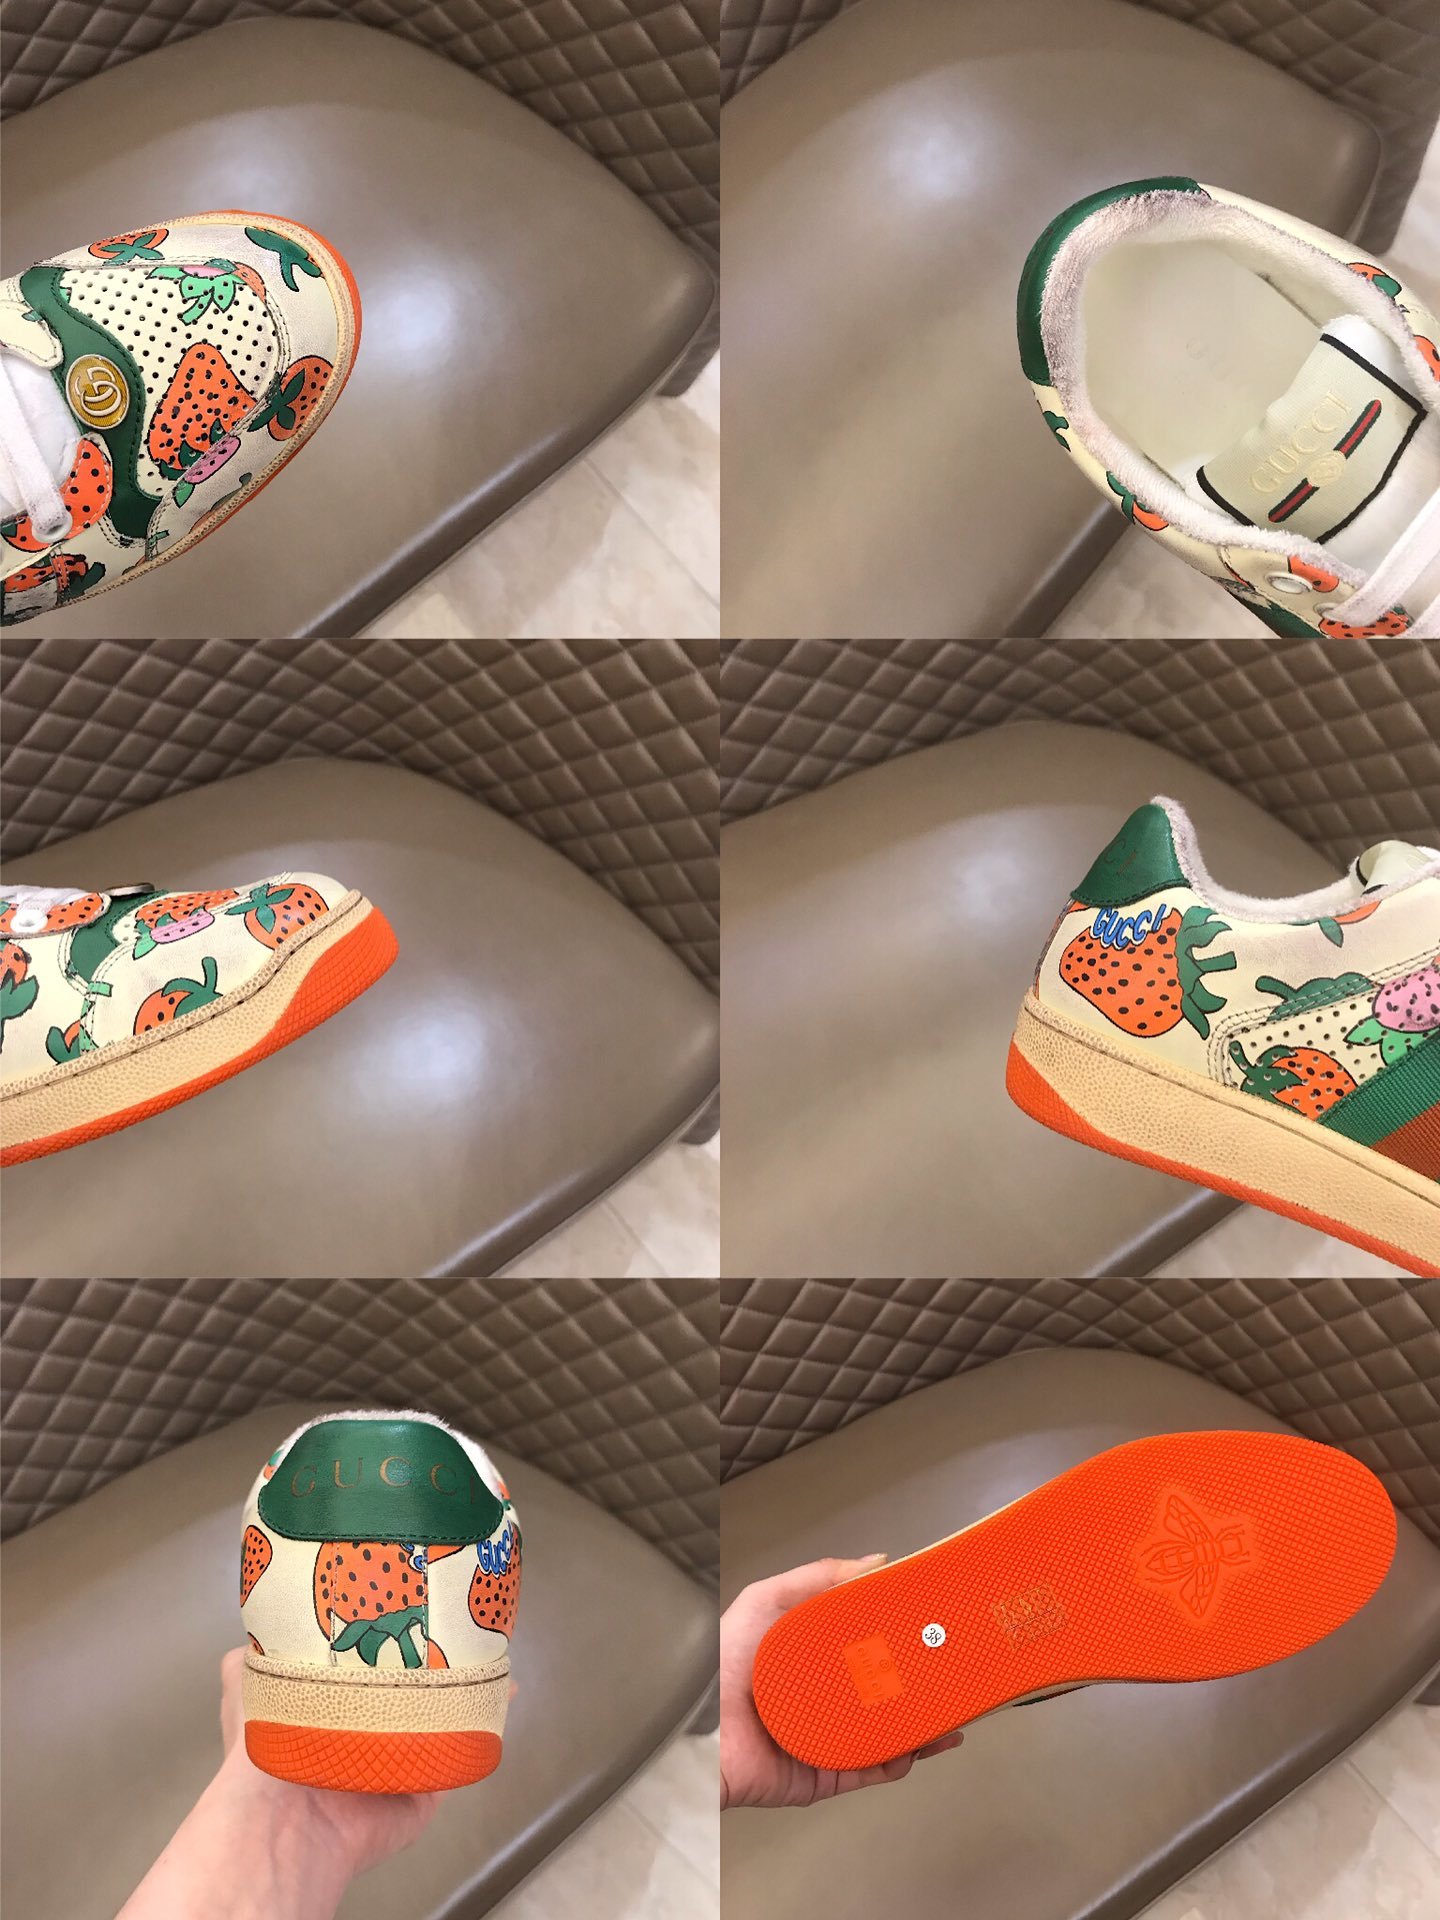 Gucci High Quality Sneakers White and strawberry print with beige soles MS021151